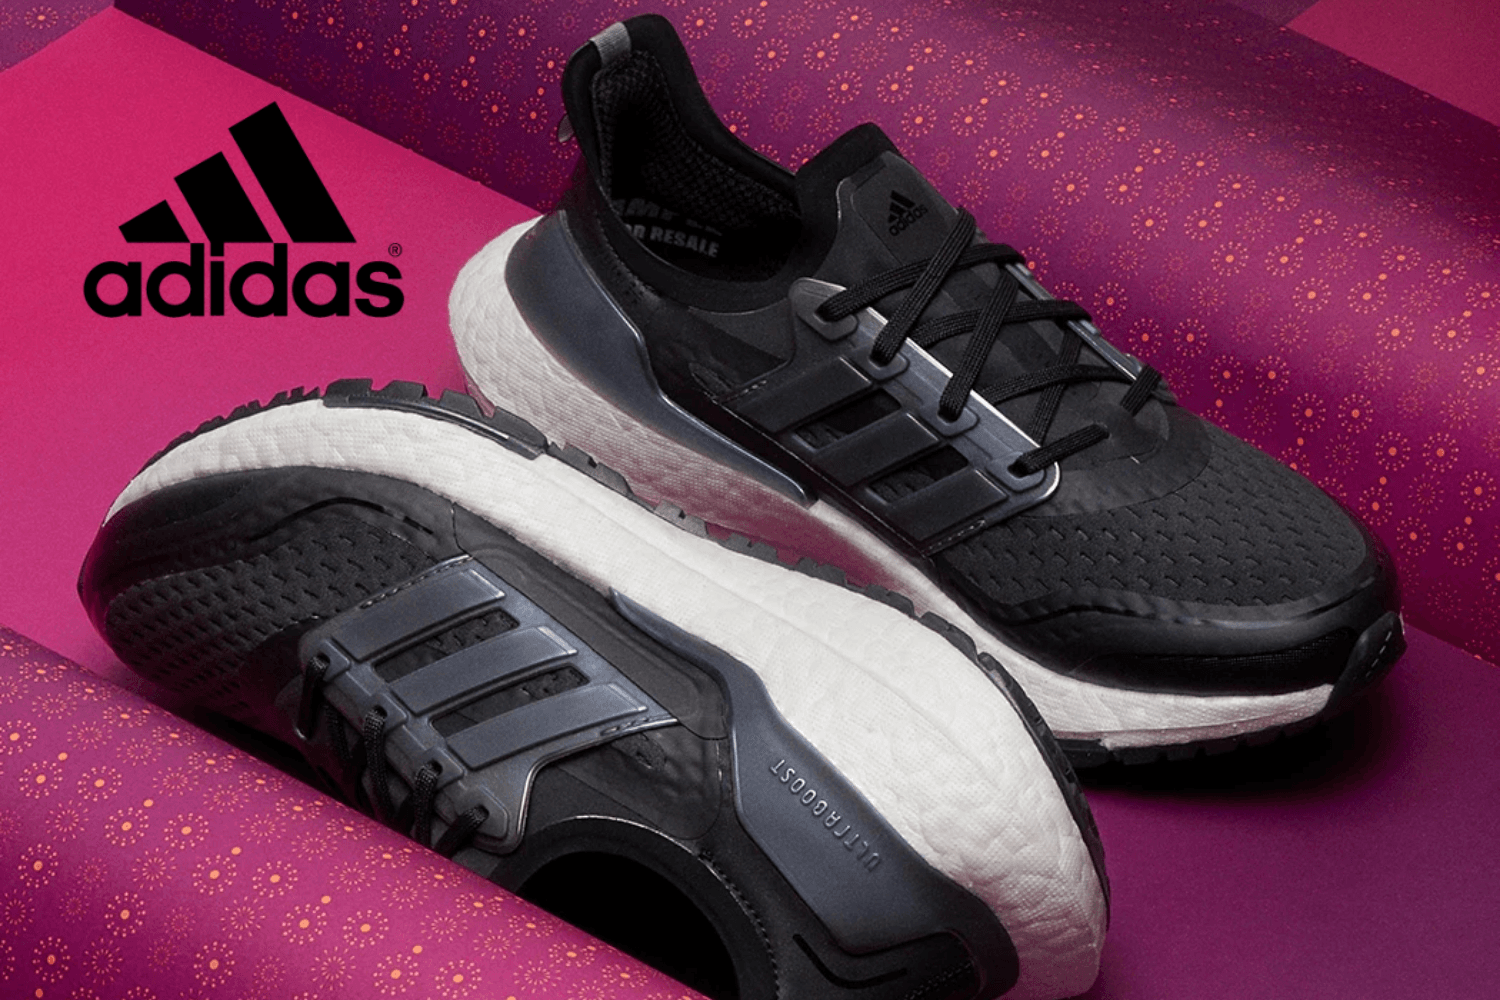 The adidas Black Friday sale with discounts up to 50%